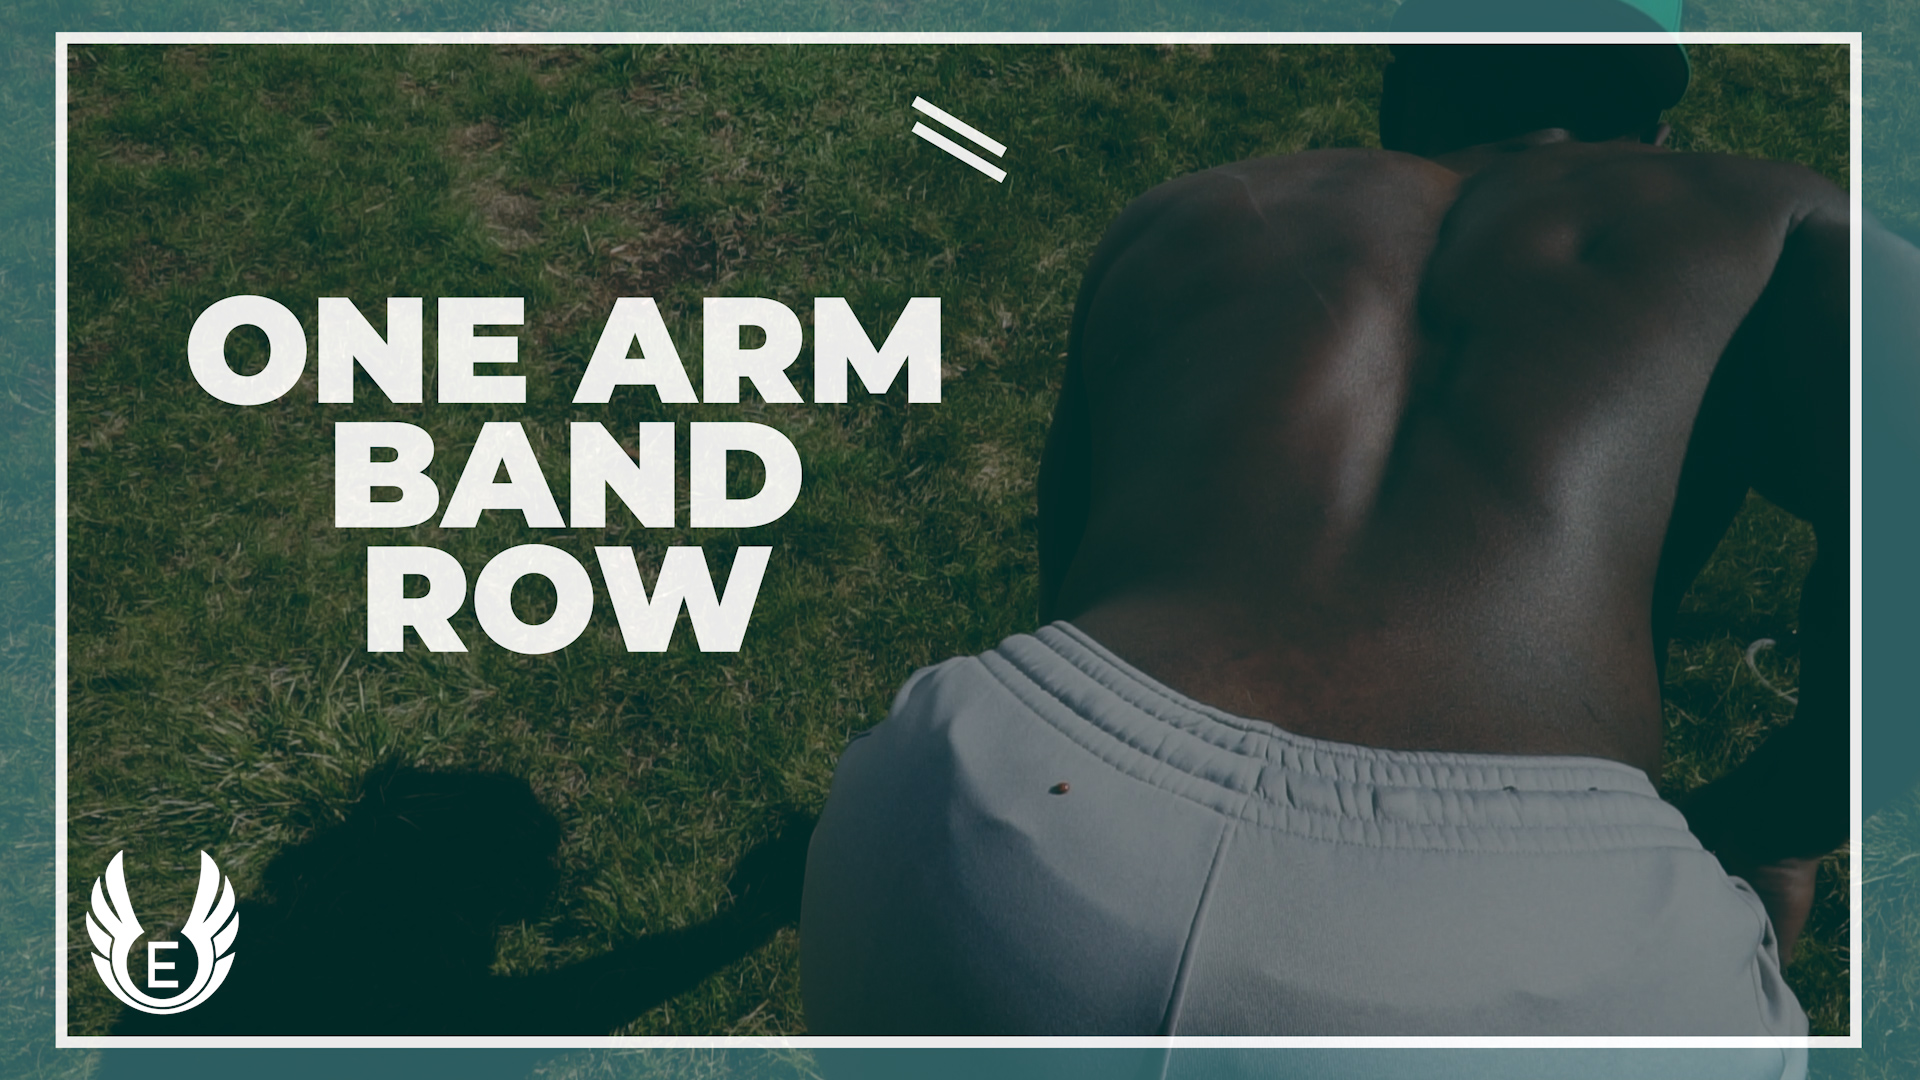 resistance band back workout band one arm row